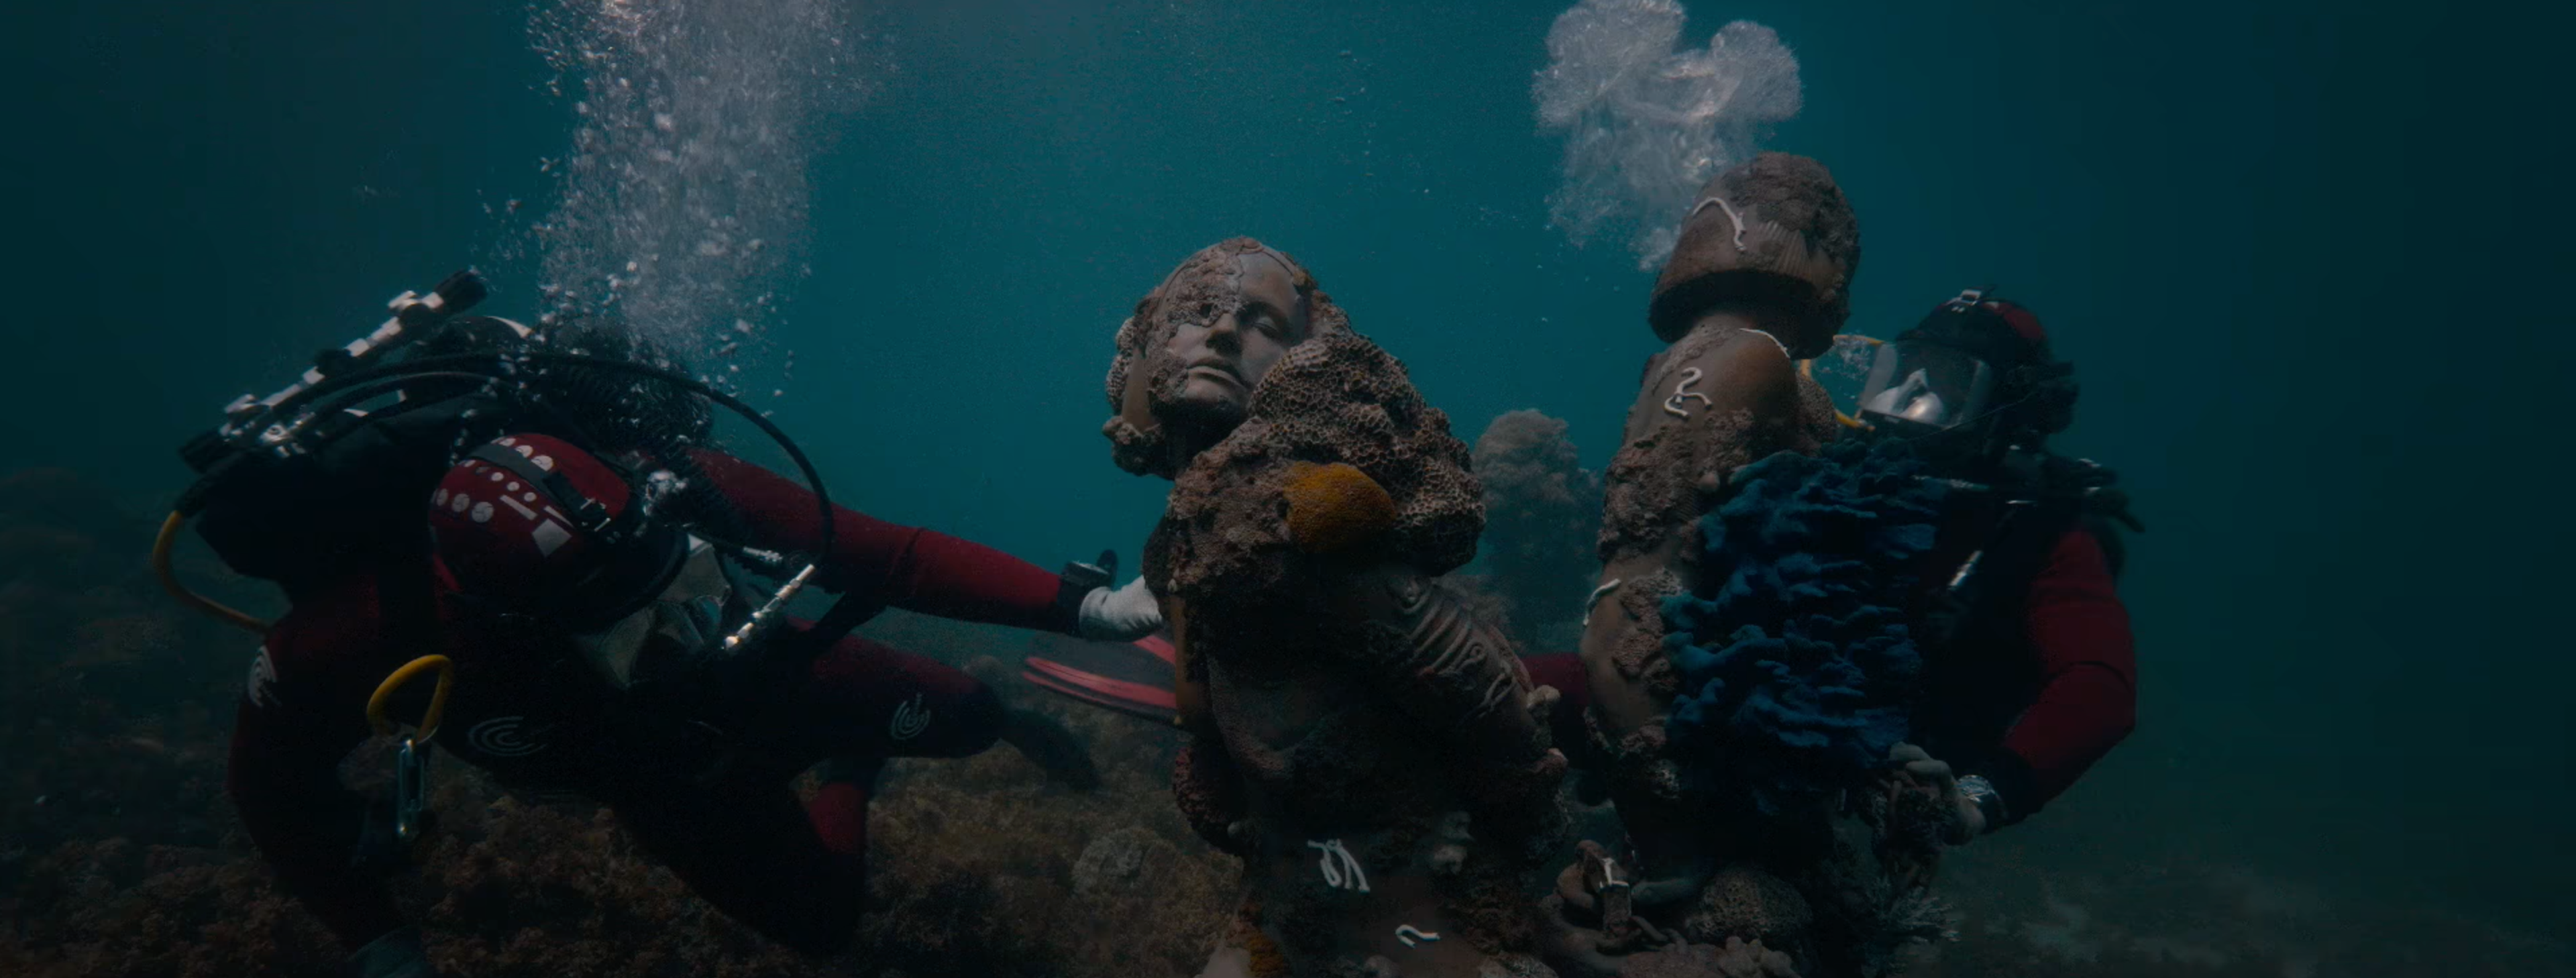 This image shows two divers underwater, handling two statues.